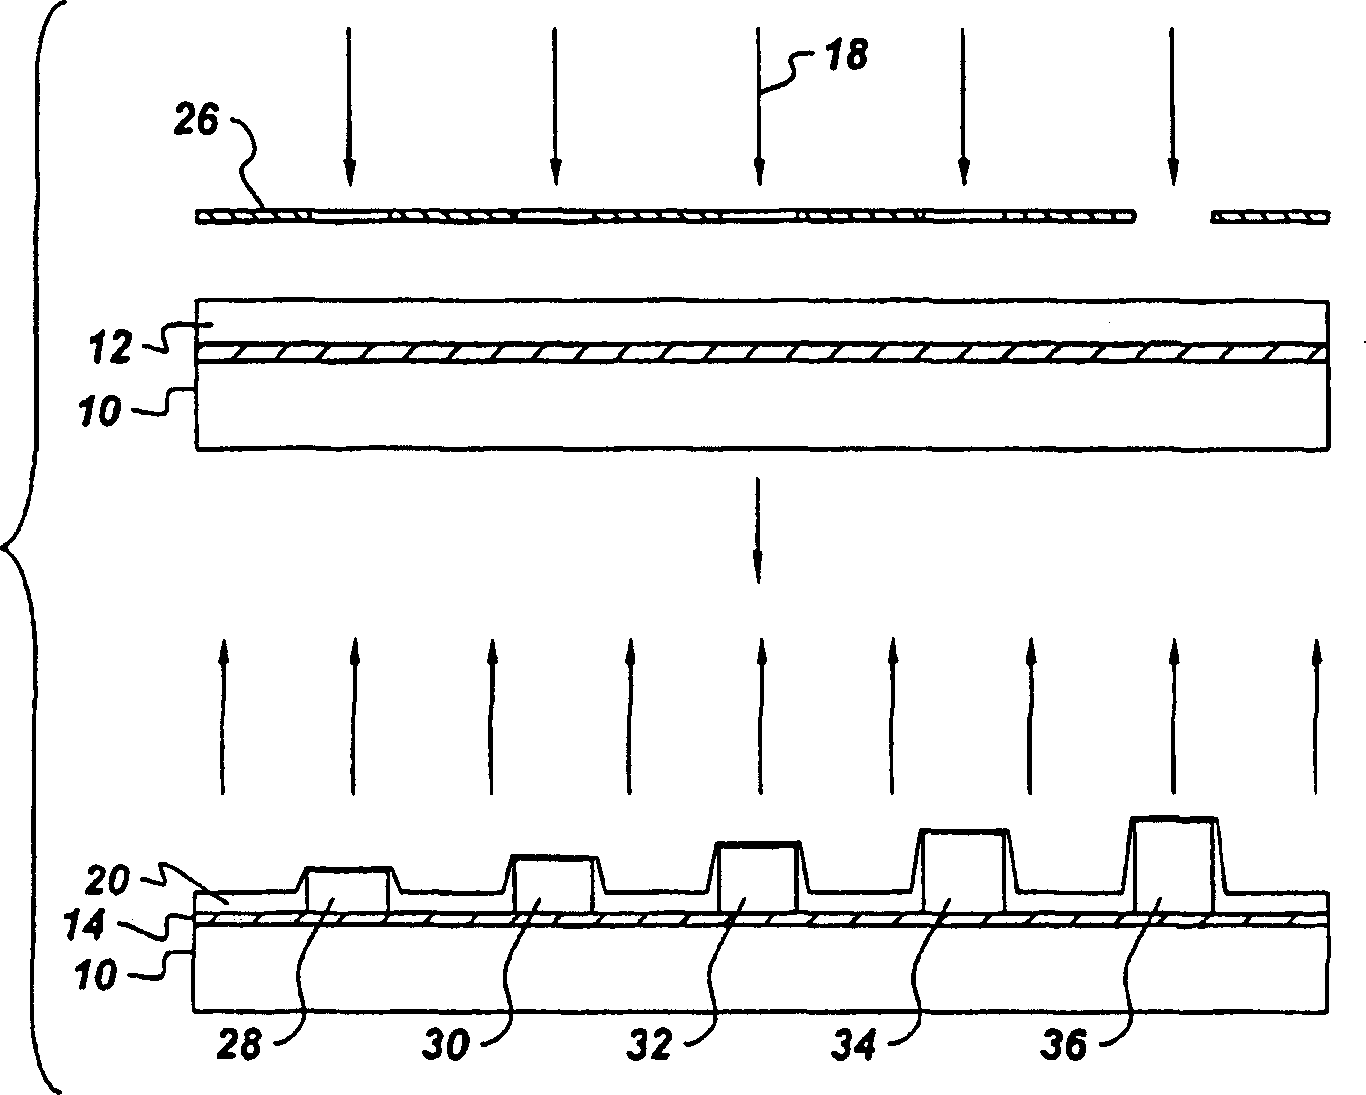 Polymeric optical device structures having controlled topographic and refractive index profiles